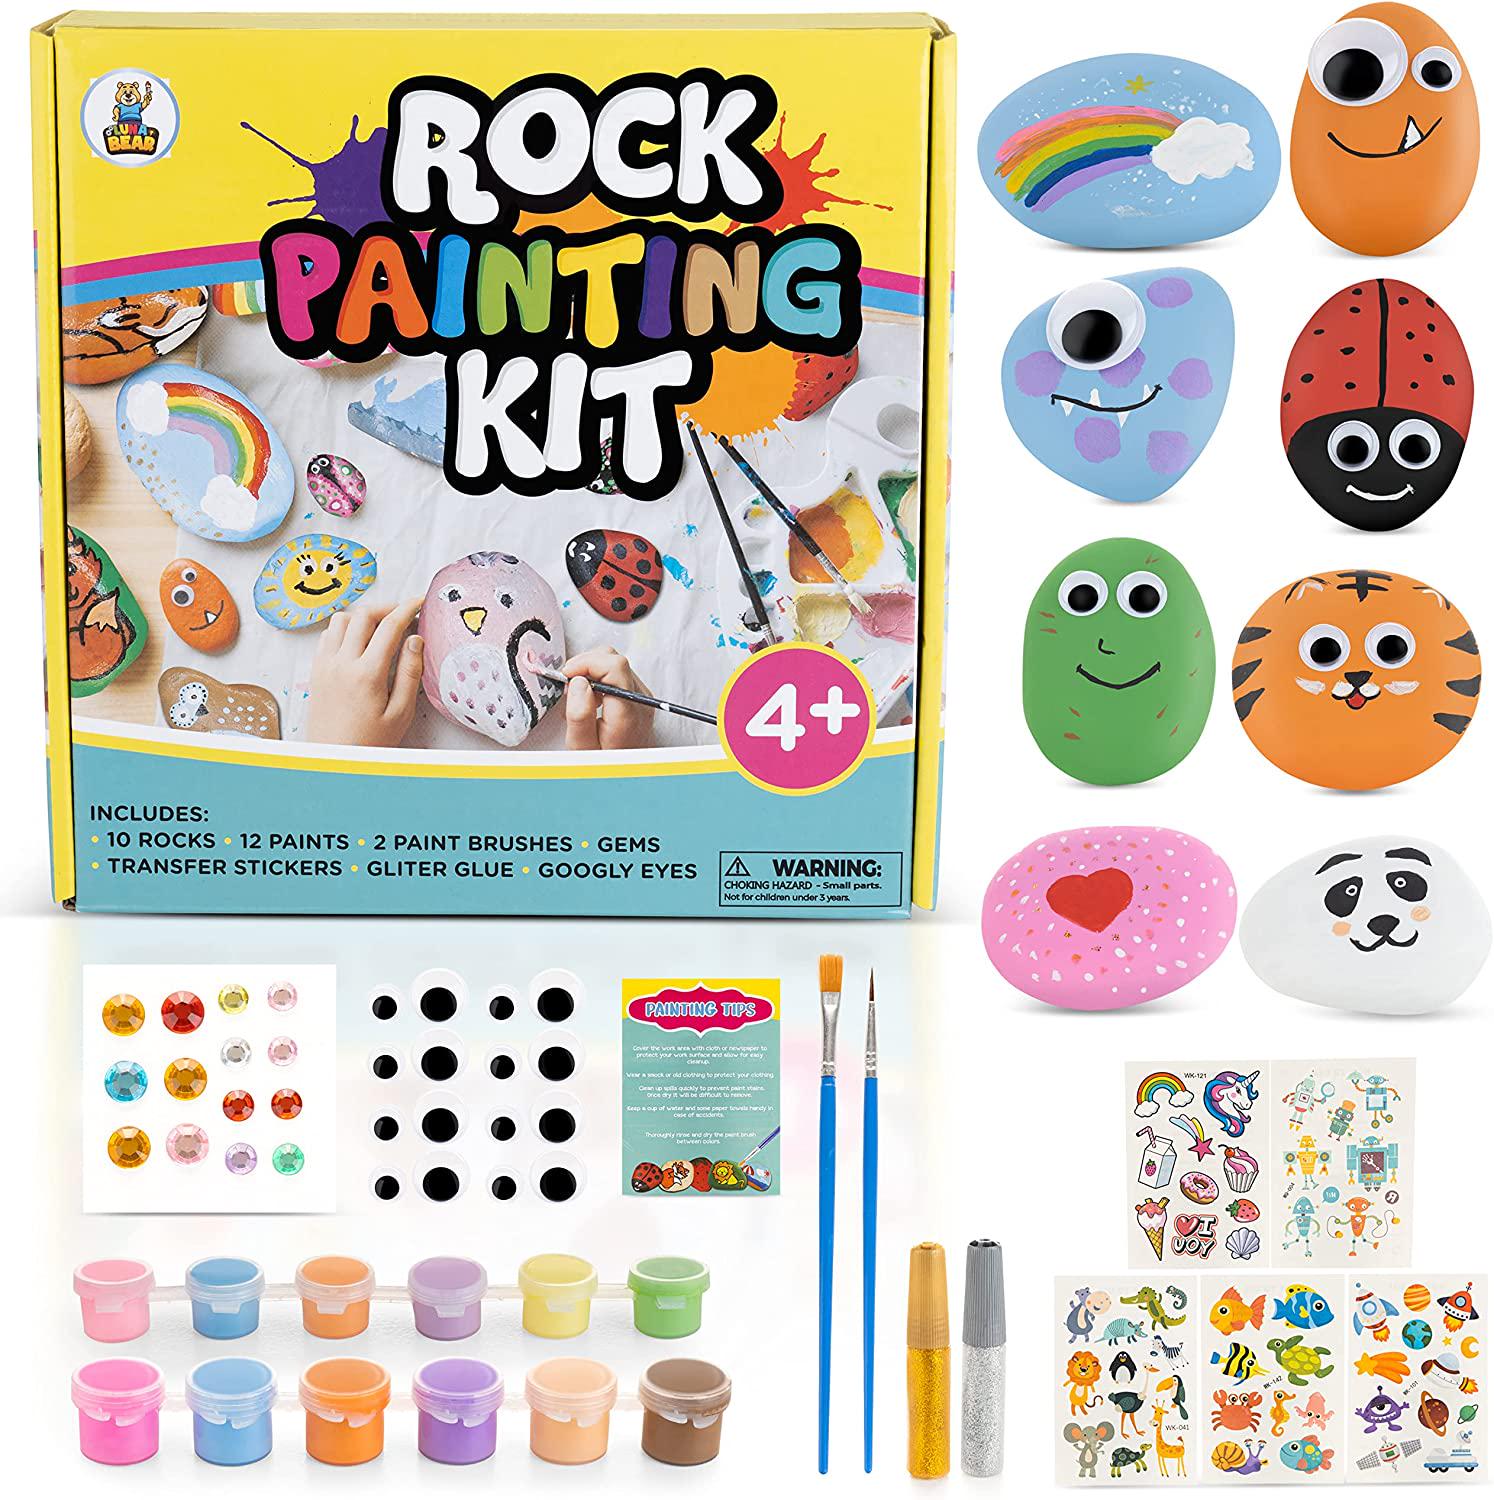 Luna Bear, Luna Bear Products - Rock Painting Kit - DIY Arts and Crafts Project Kits for Kids - Make Handmade Decorations, Gifts, Pet Rocks - Includes Smooth River Rocks, Non-Toxic Paint, Brushes, Transfers - 4+